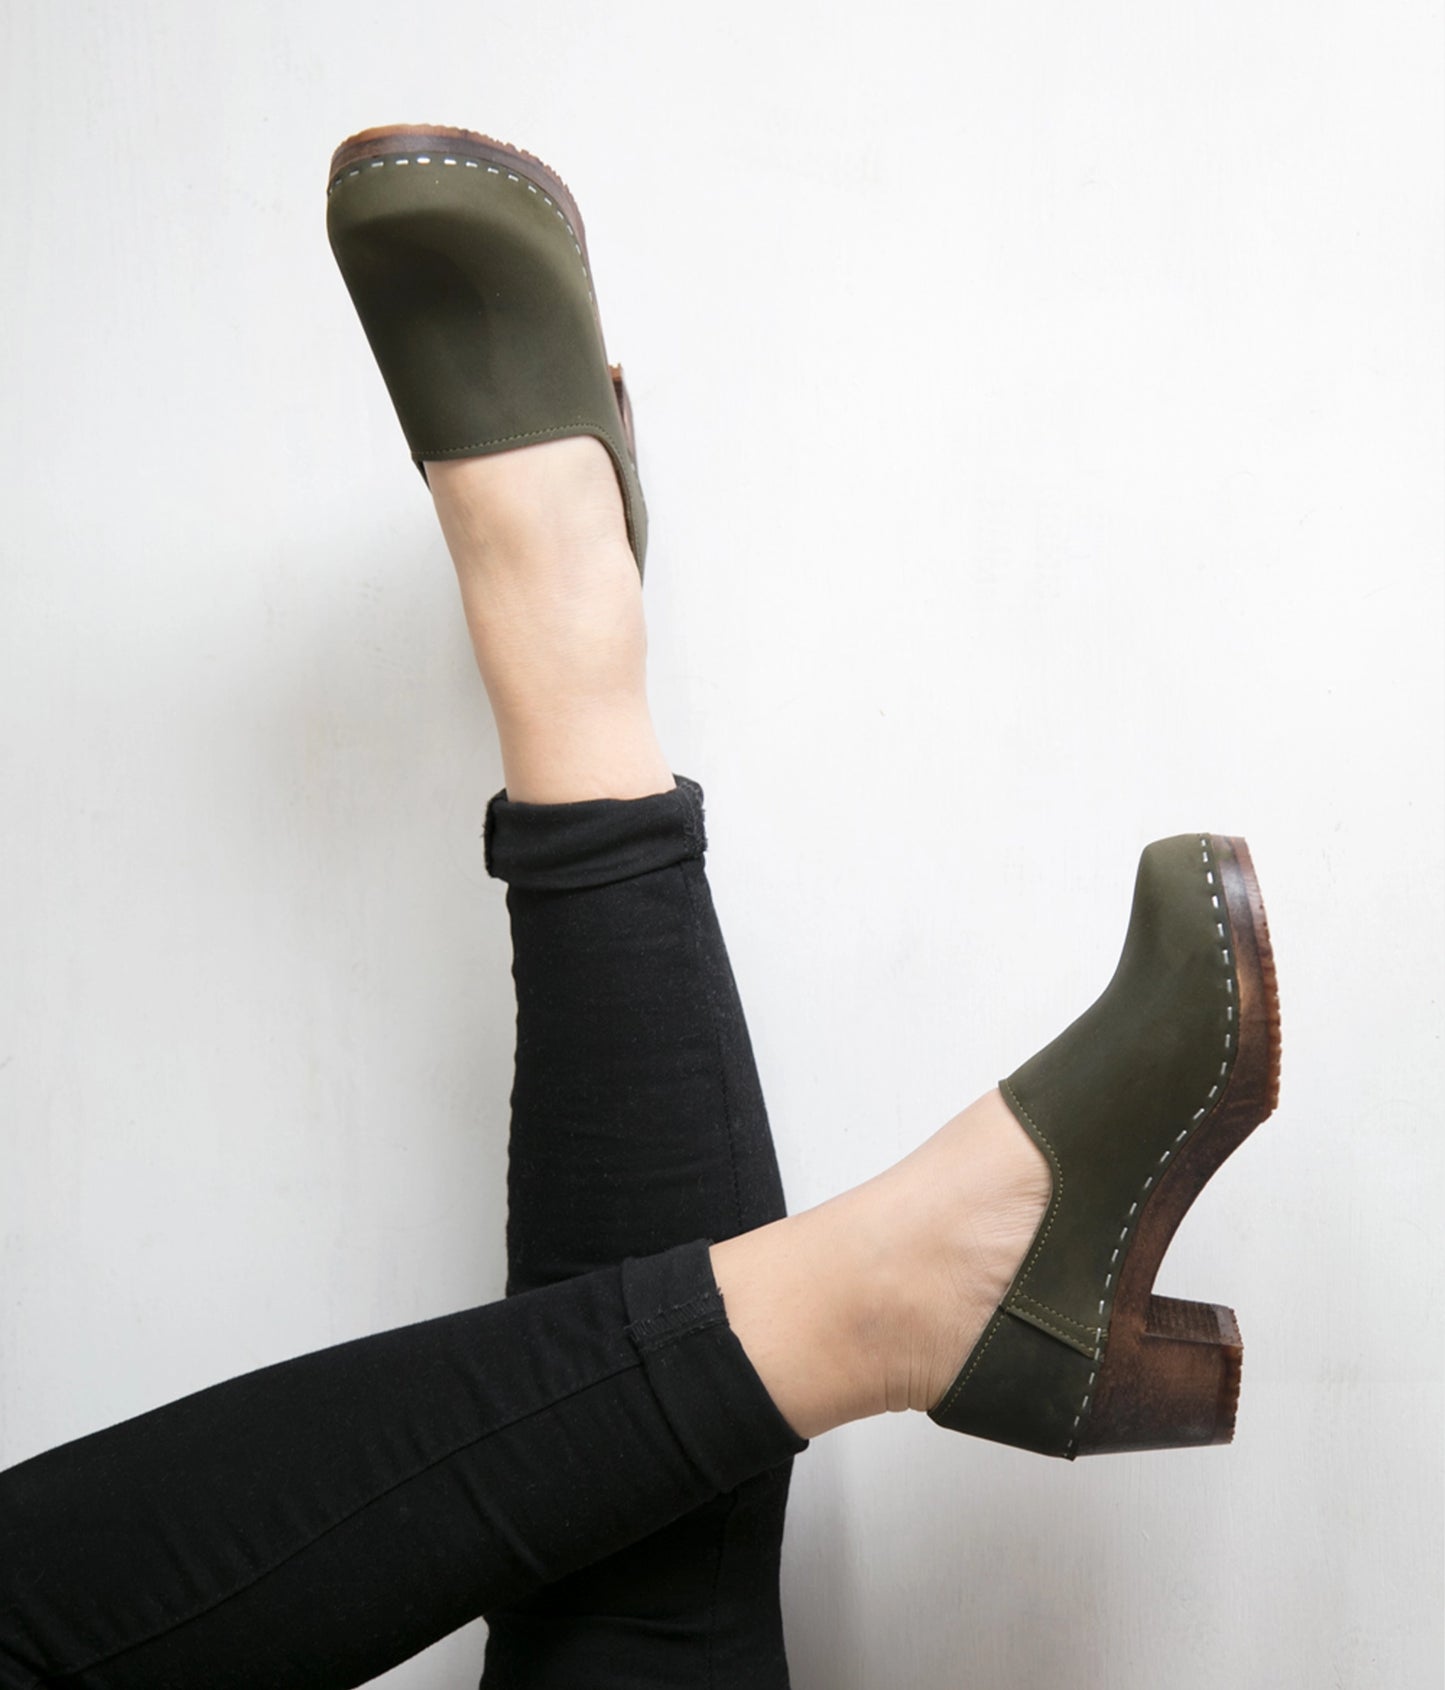 high heeled closed-back clogs in olive green nubuck leather stapled on a dark wooden base